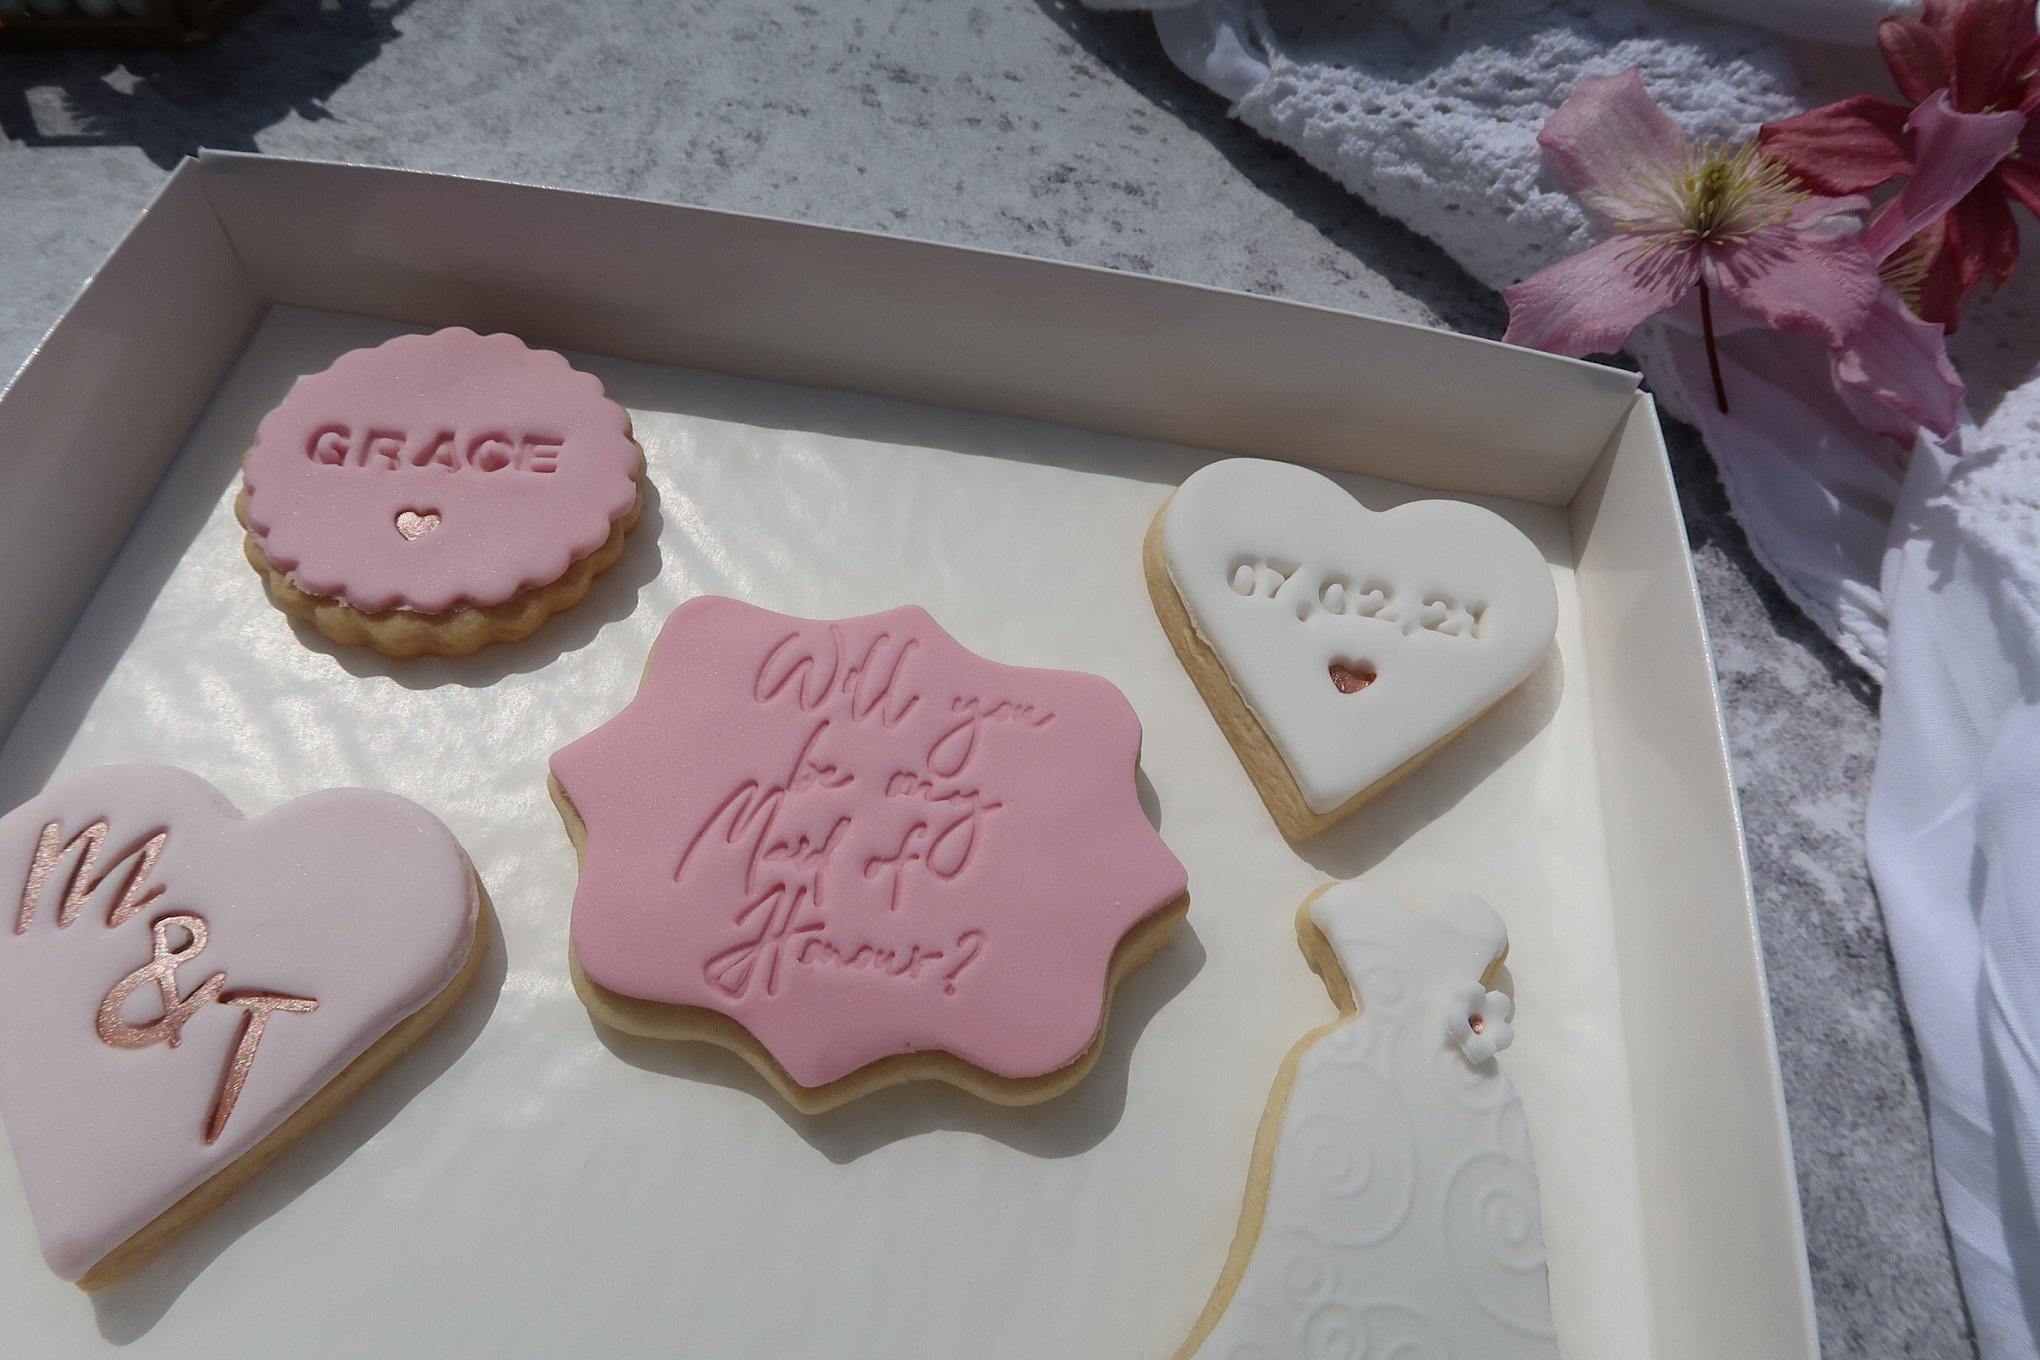 will you be my maid of honour cookie set, wedding dress cookie, heart date of wedding, round cookie with name of recipient, heart cookie with bride and groom initials, pink, rose gold and white